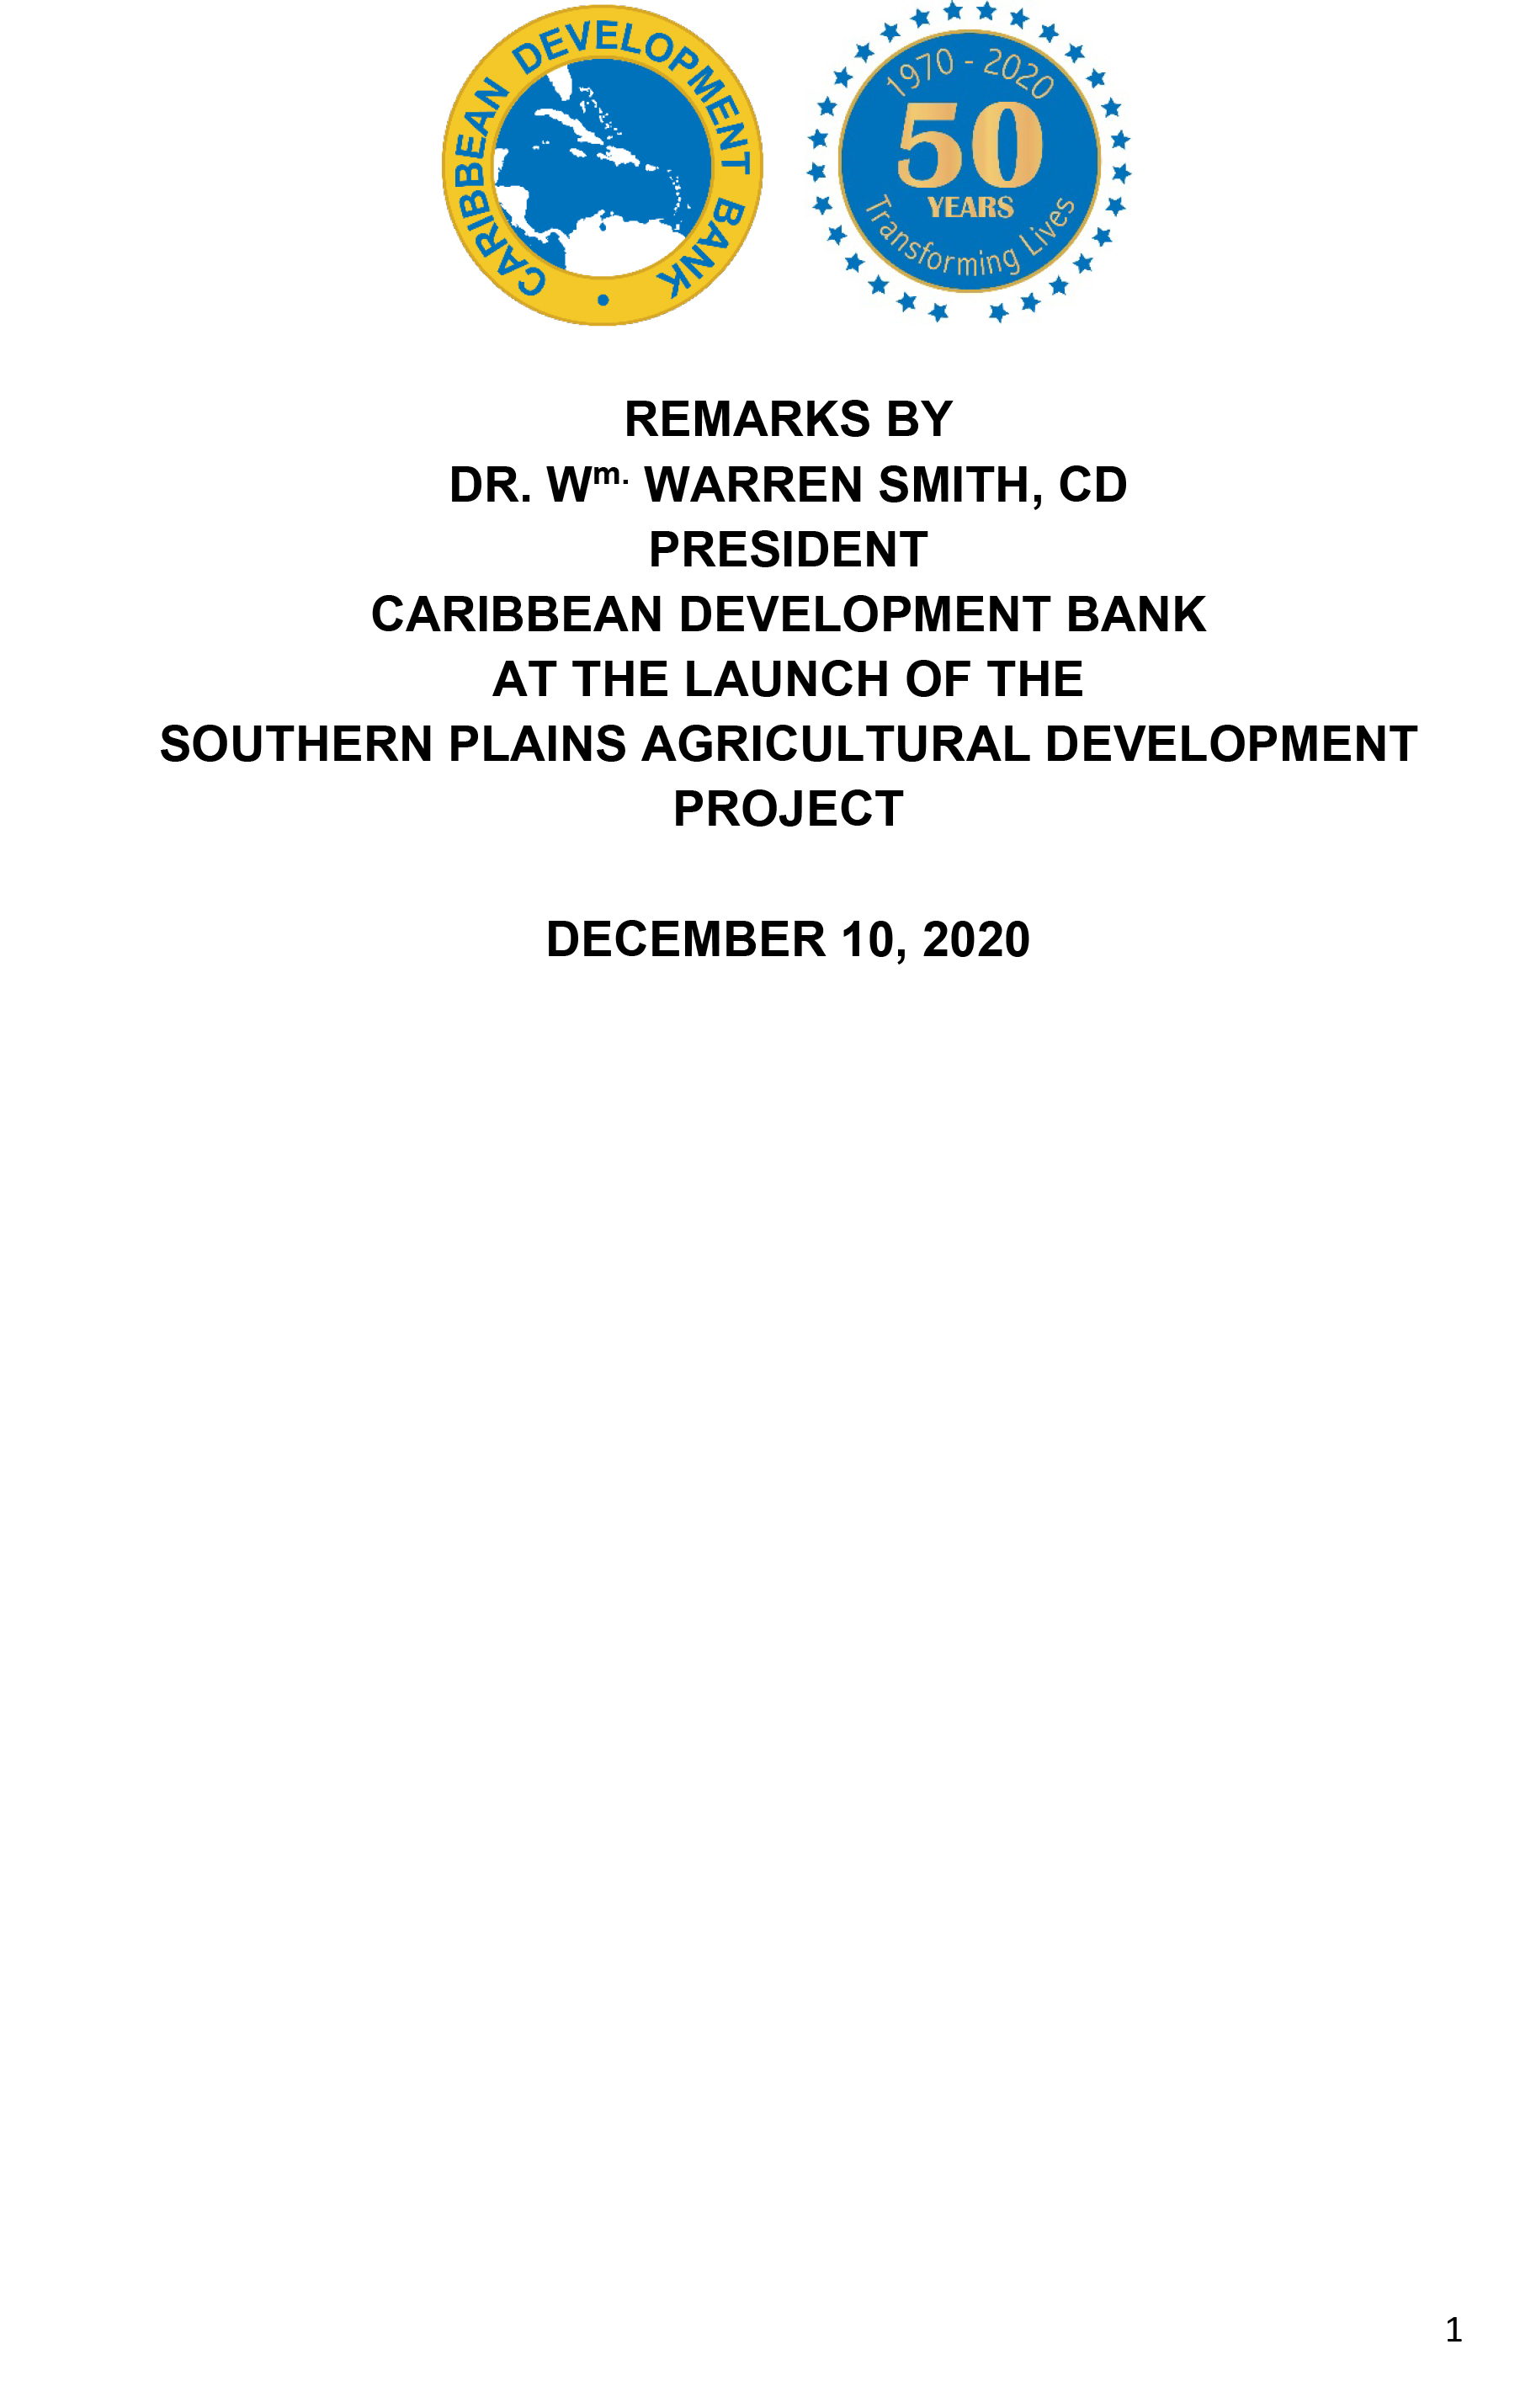 Remarks by CDB President at the launch of the Southern Plains Agricultural Development Project